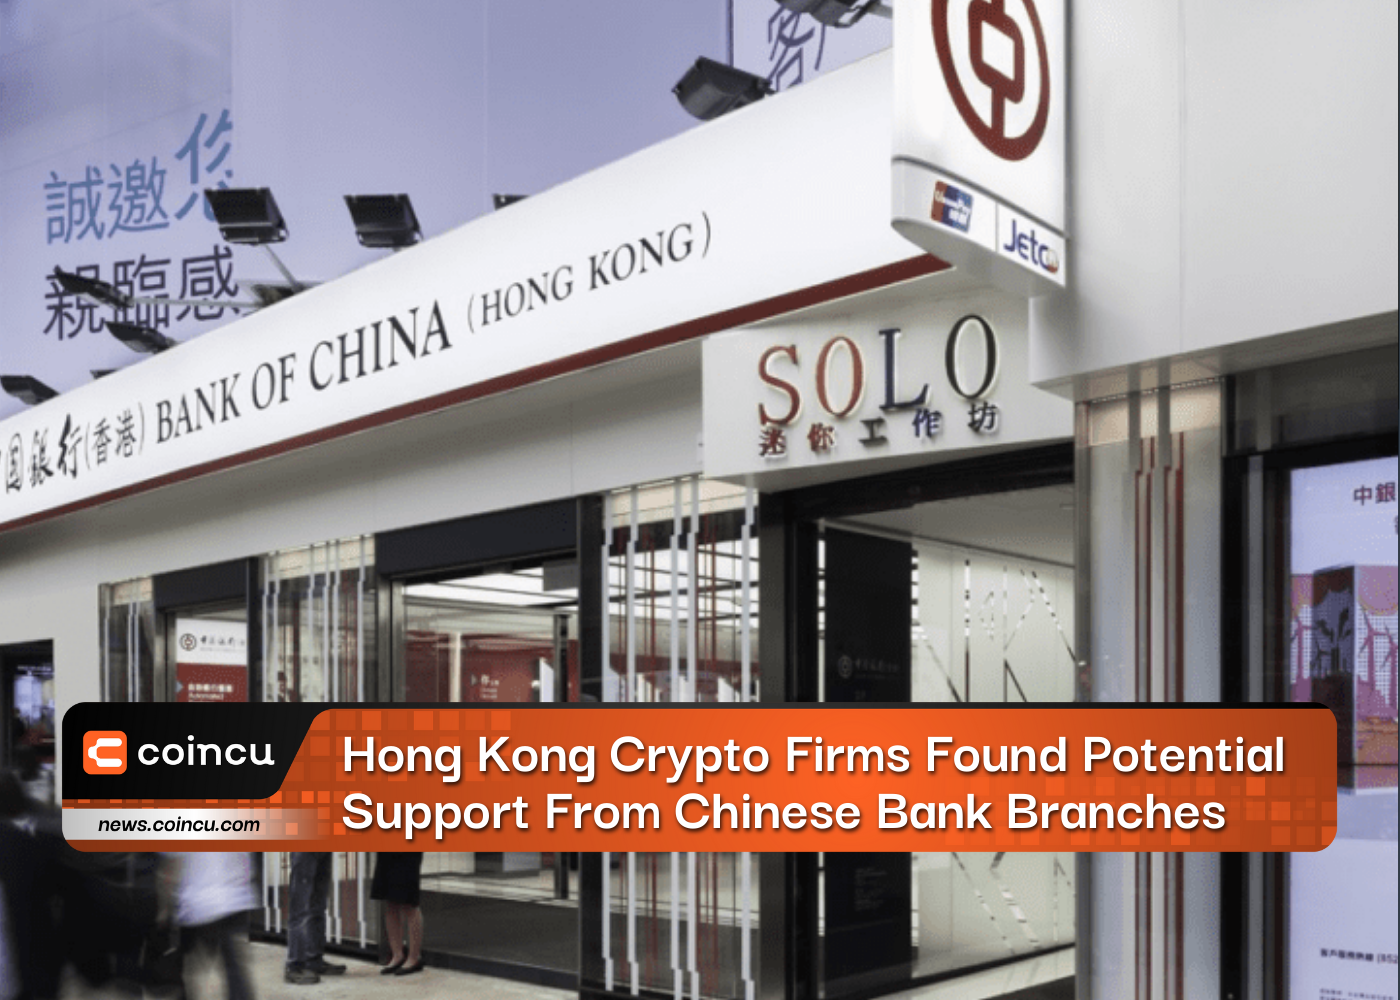 Hong Kong Crypto Firms Found Potential Support From Chinese Bank Branches